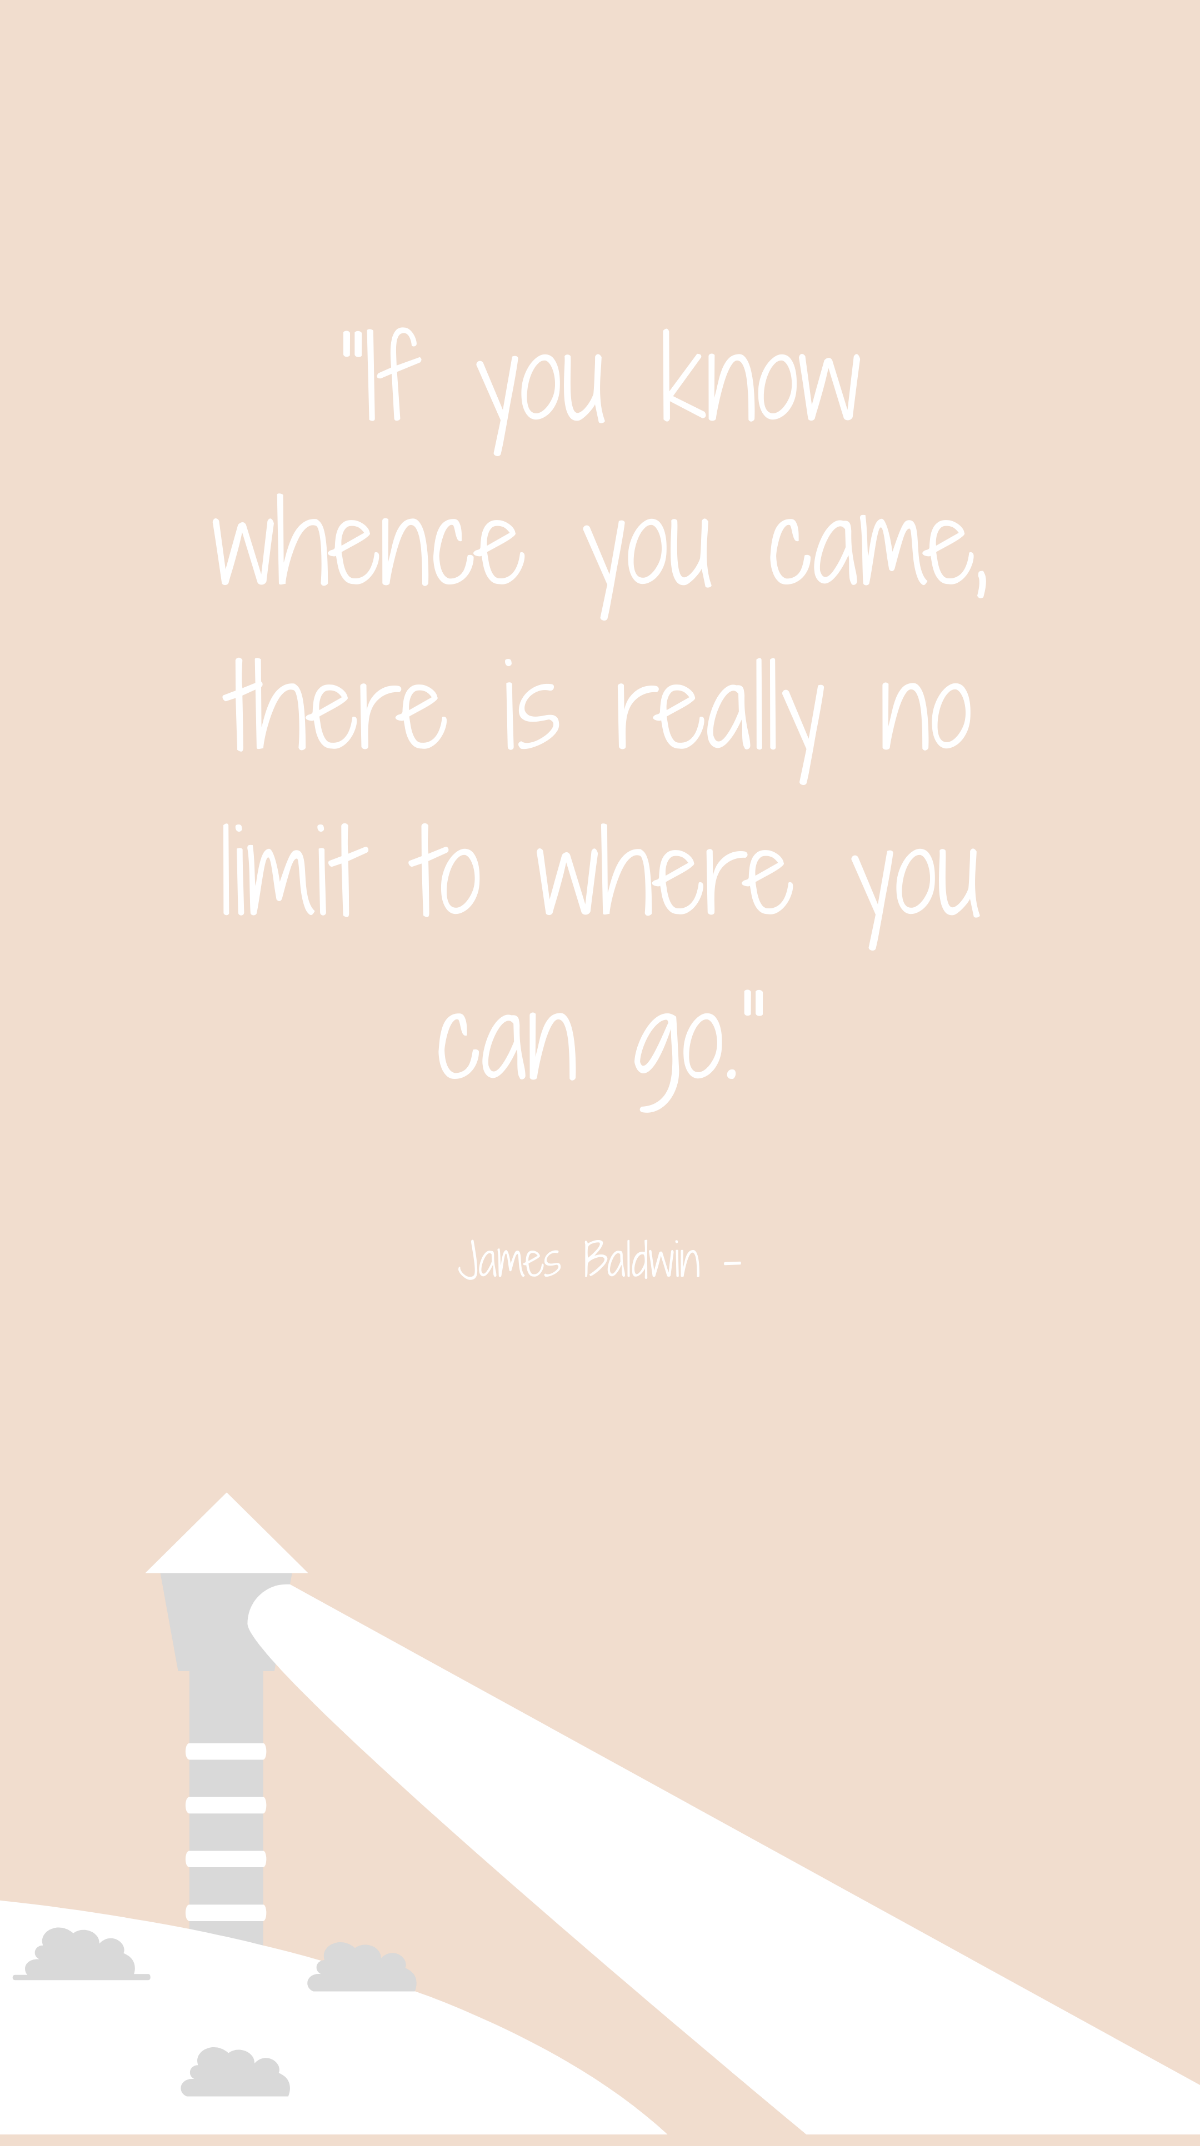 James Baldwin - If you know whence you came, there is really no limit to where you can go.